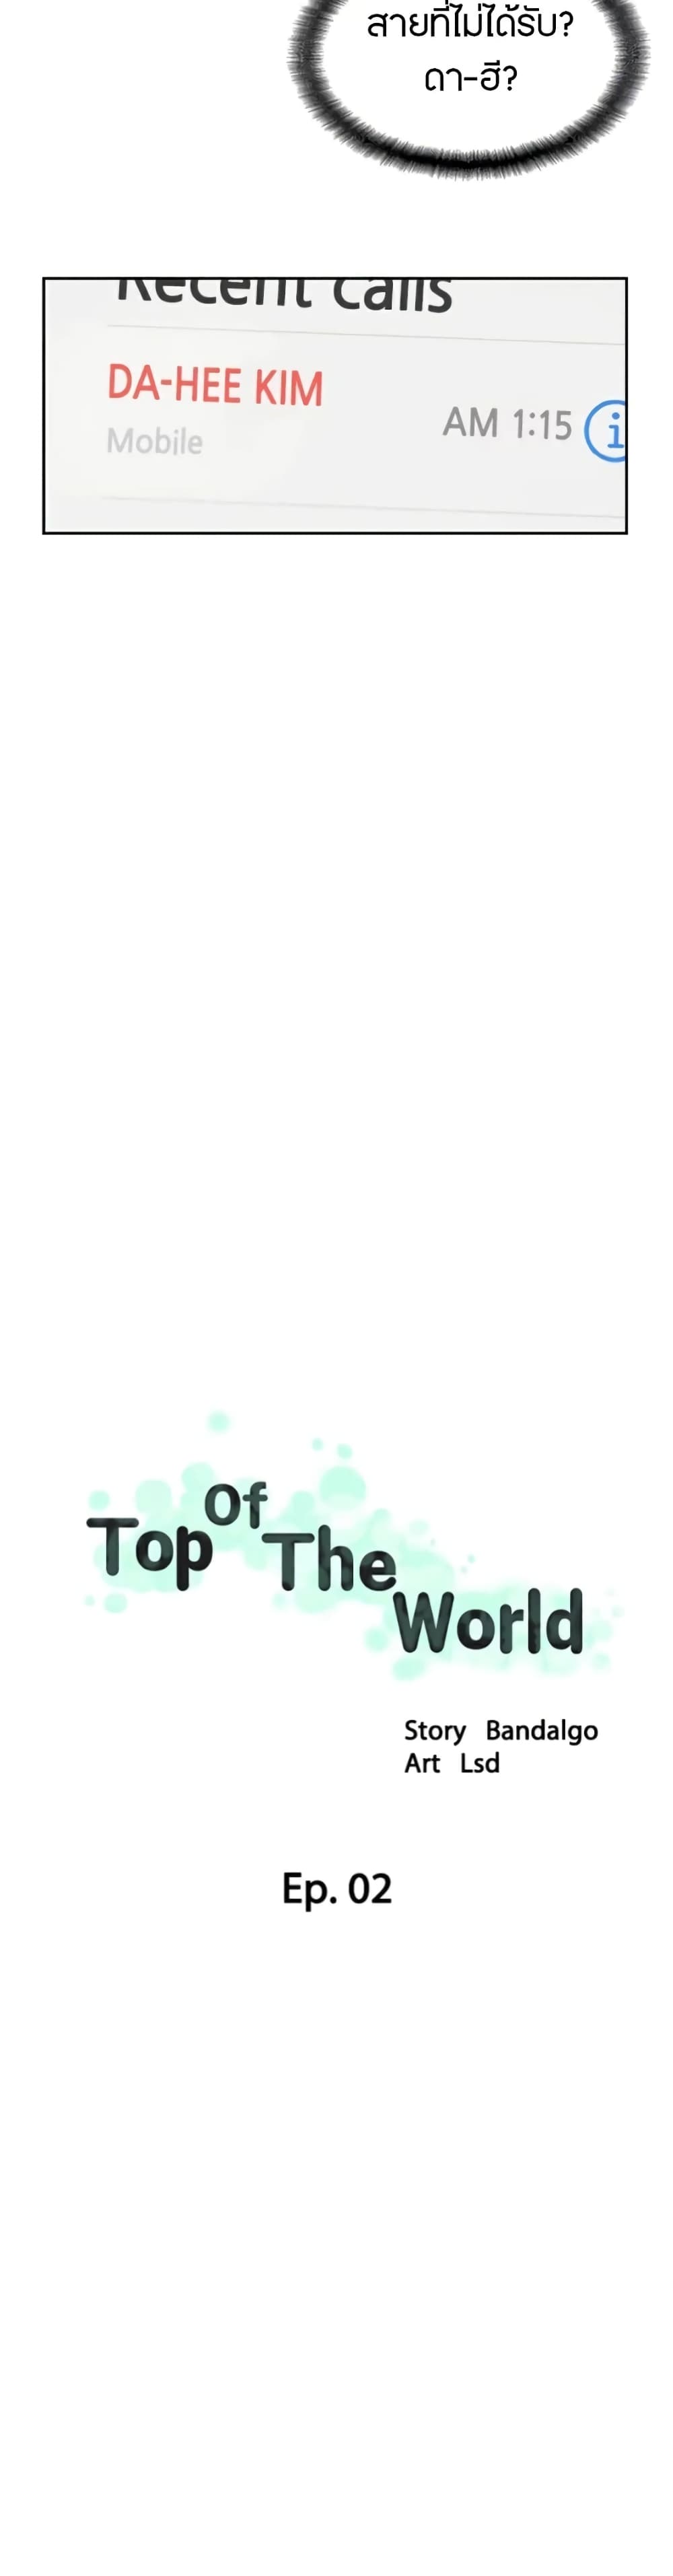 Top Of The World 2-2